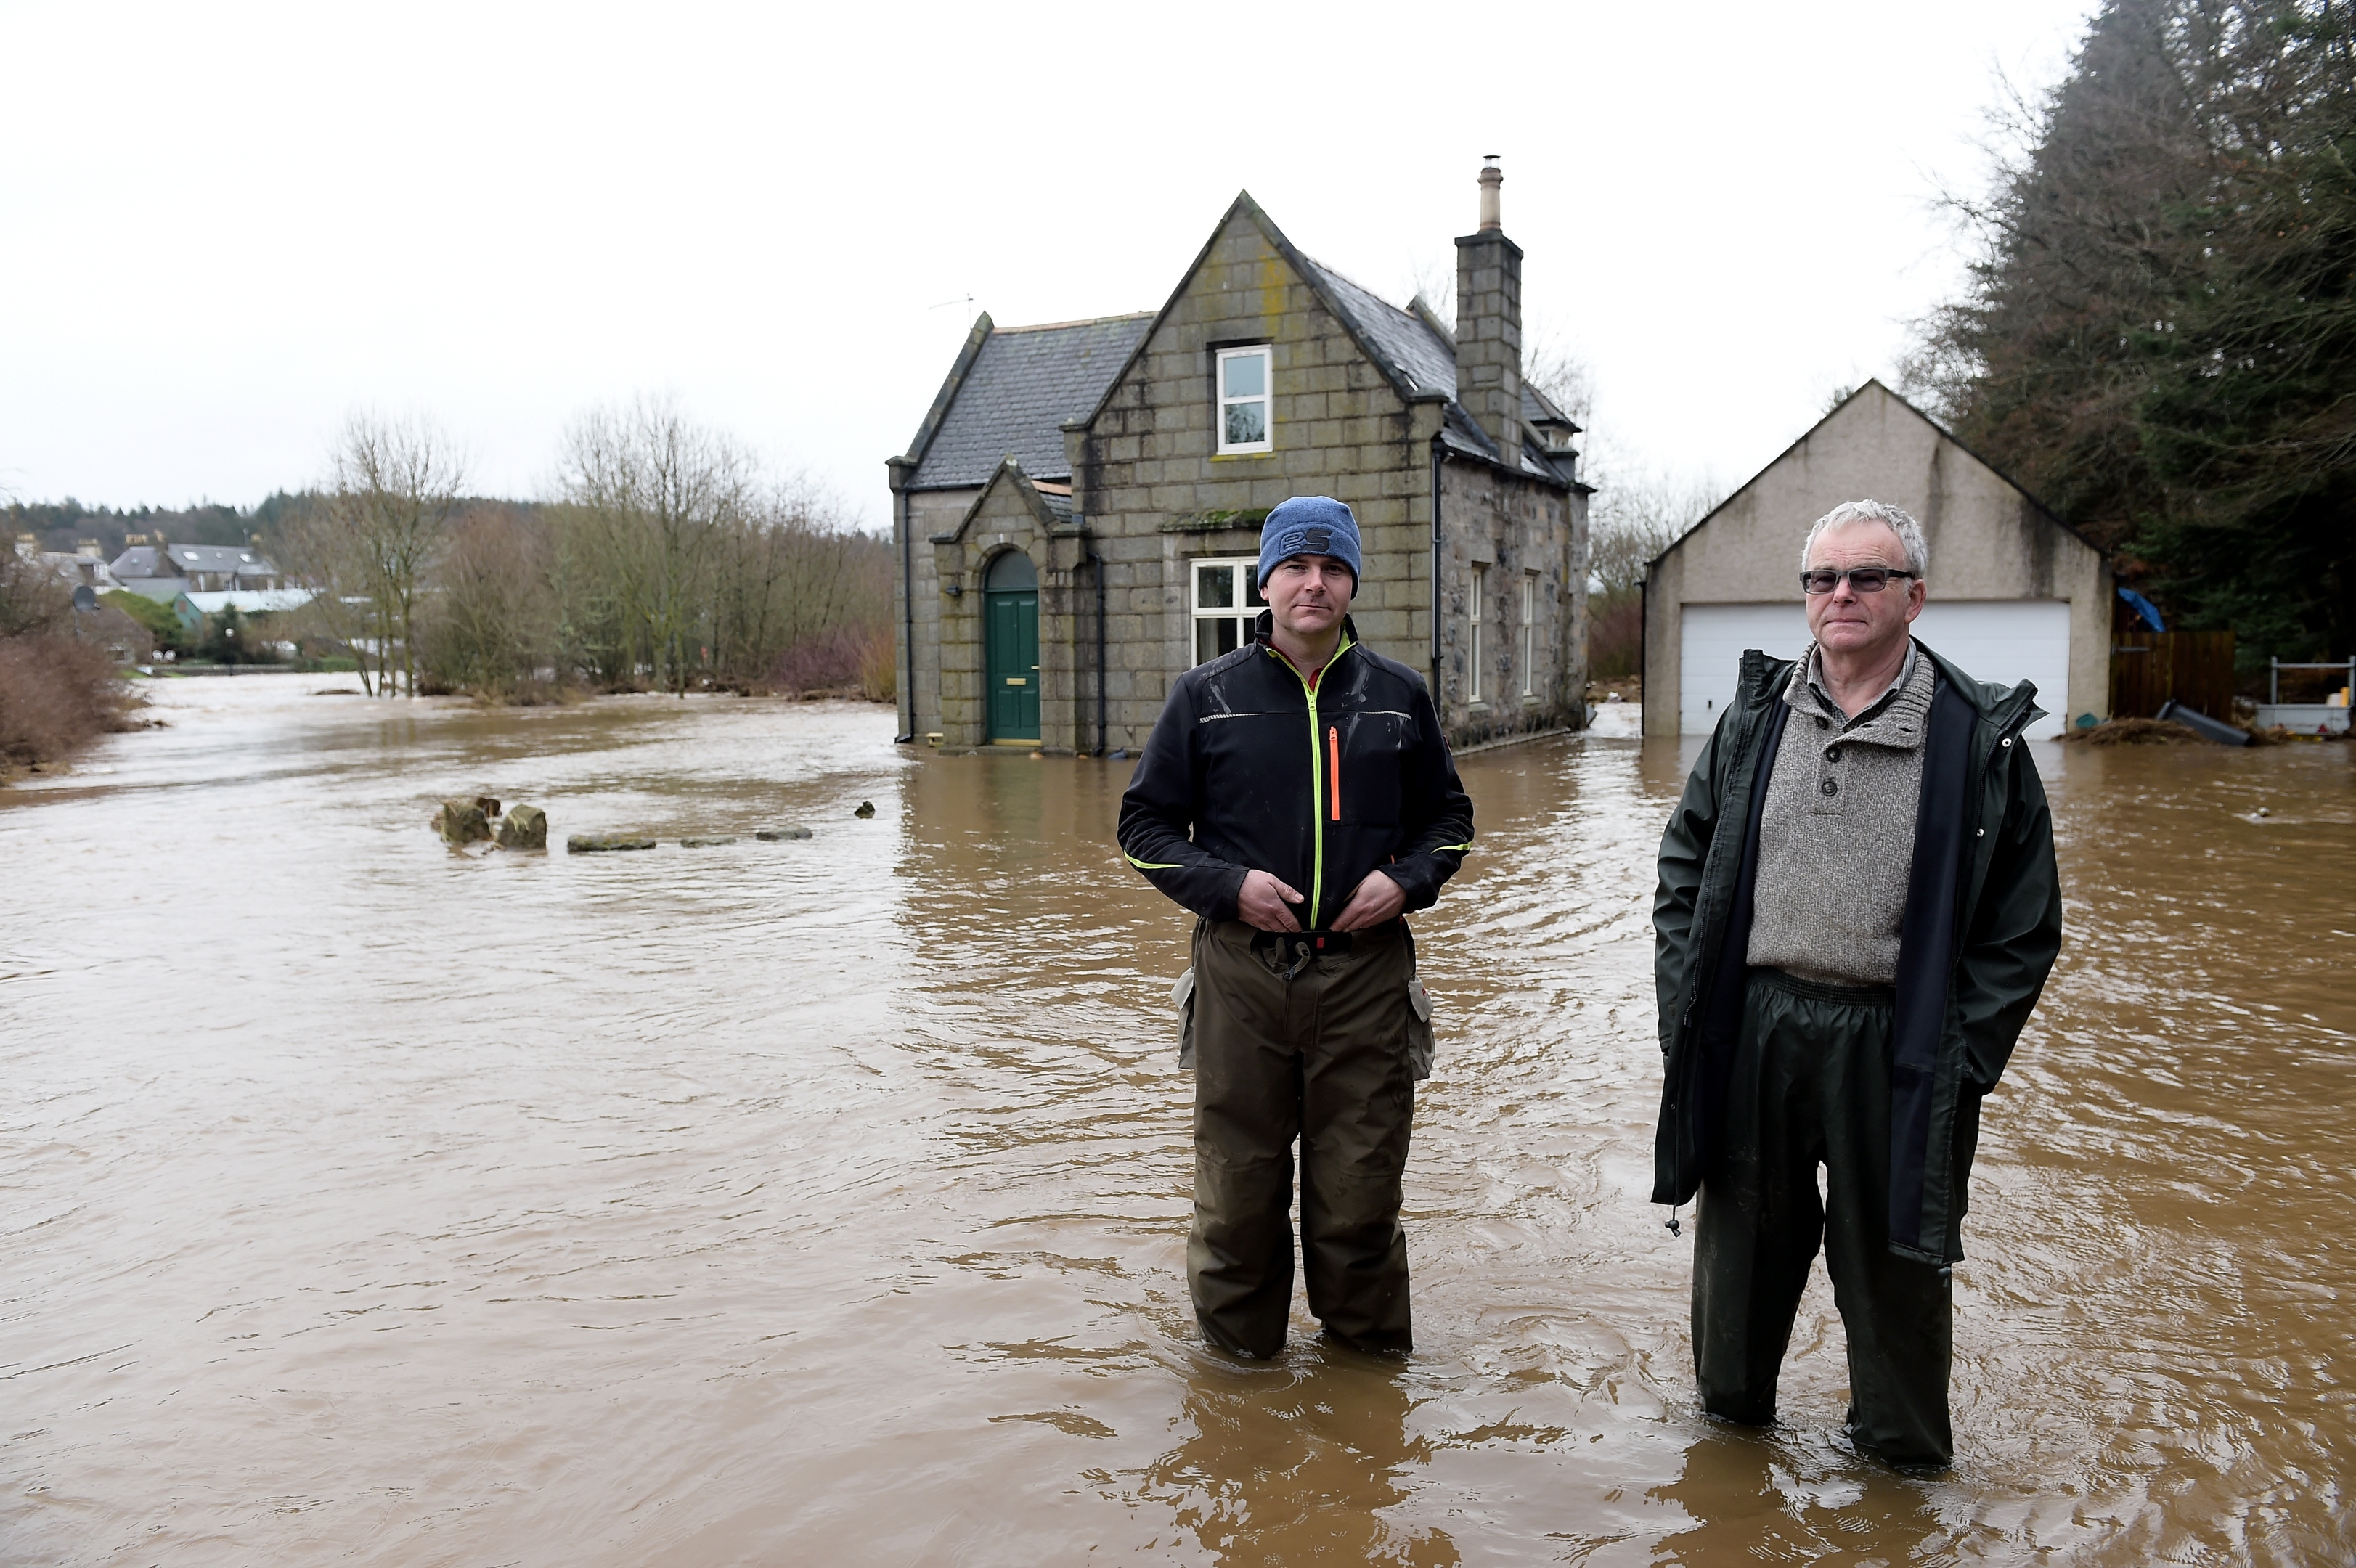 The River Ythan has burst it's banks at Ellon. The home of George Thomson on the banks of the Ythan near the old bridge which was flooded last night. George (right) is pictured with his son Craig Thomson. 